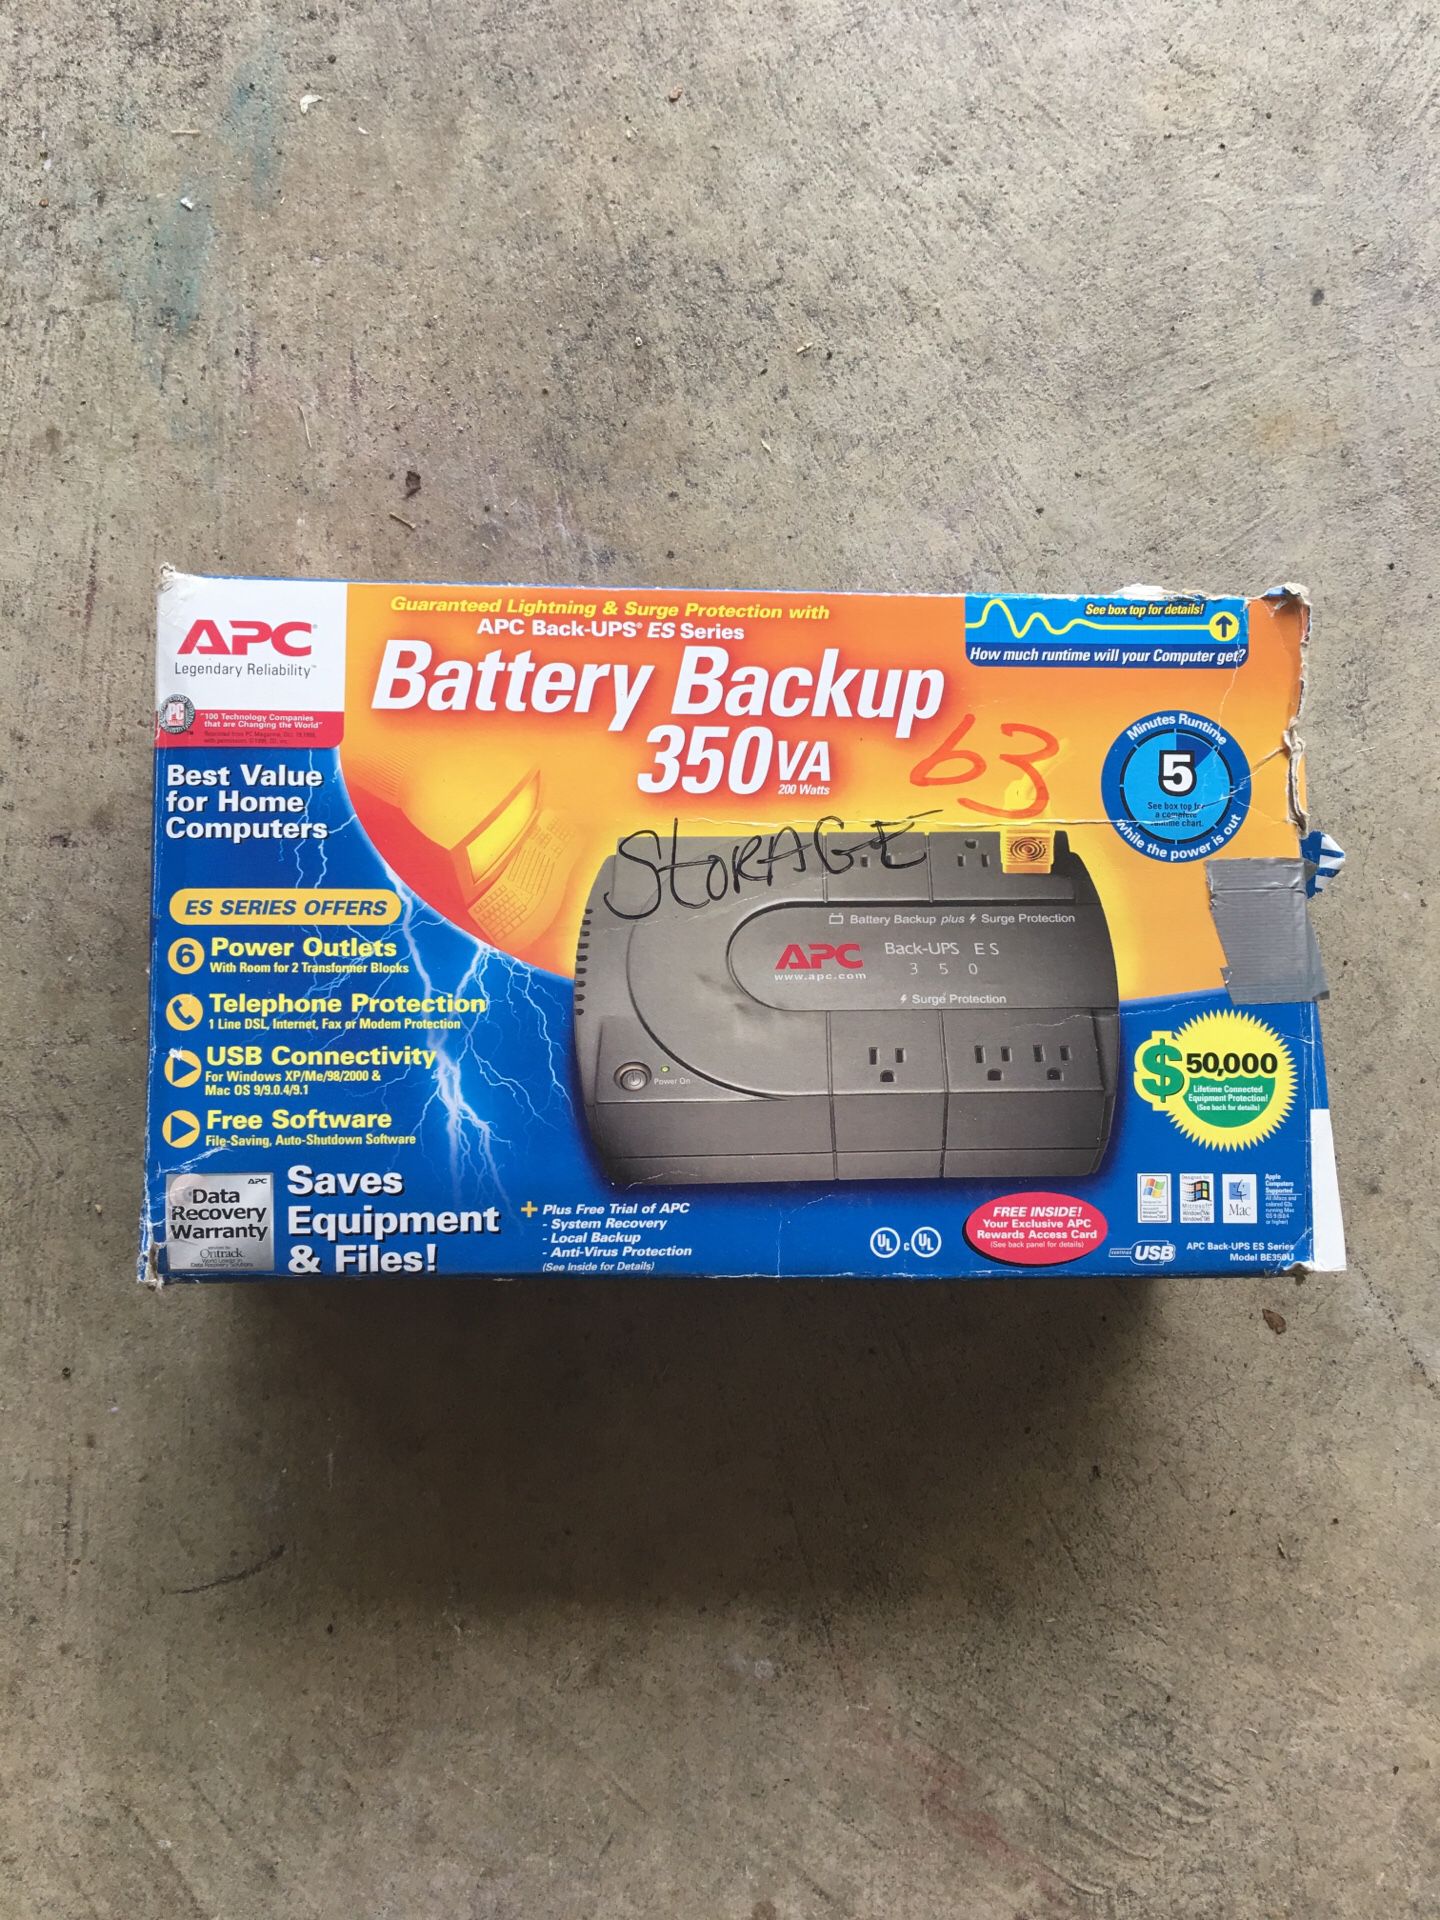 Power out let, battery backup. 80.00 new